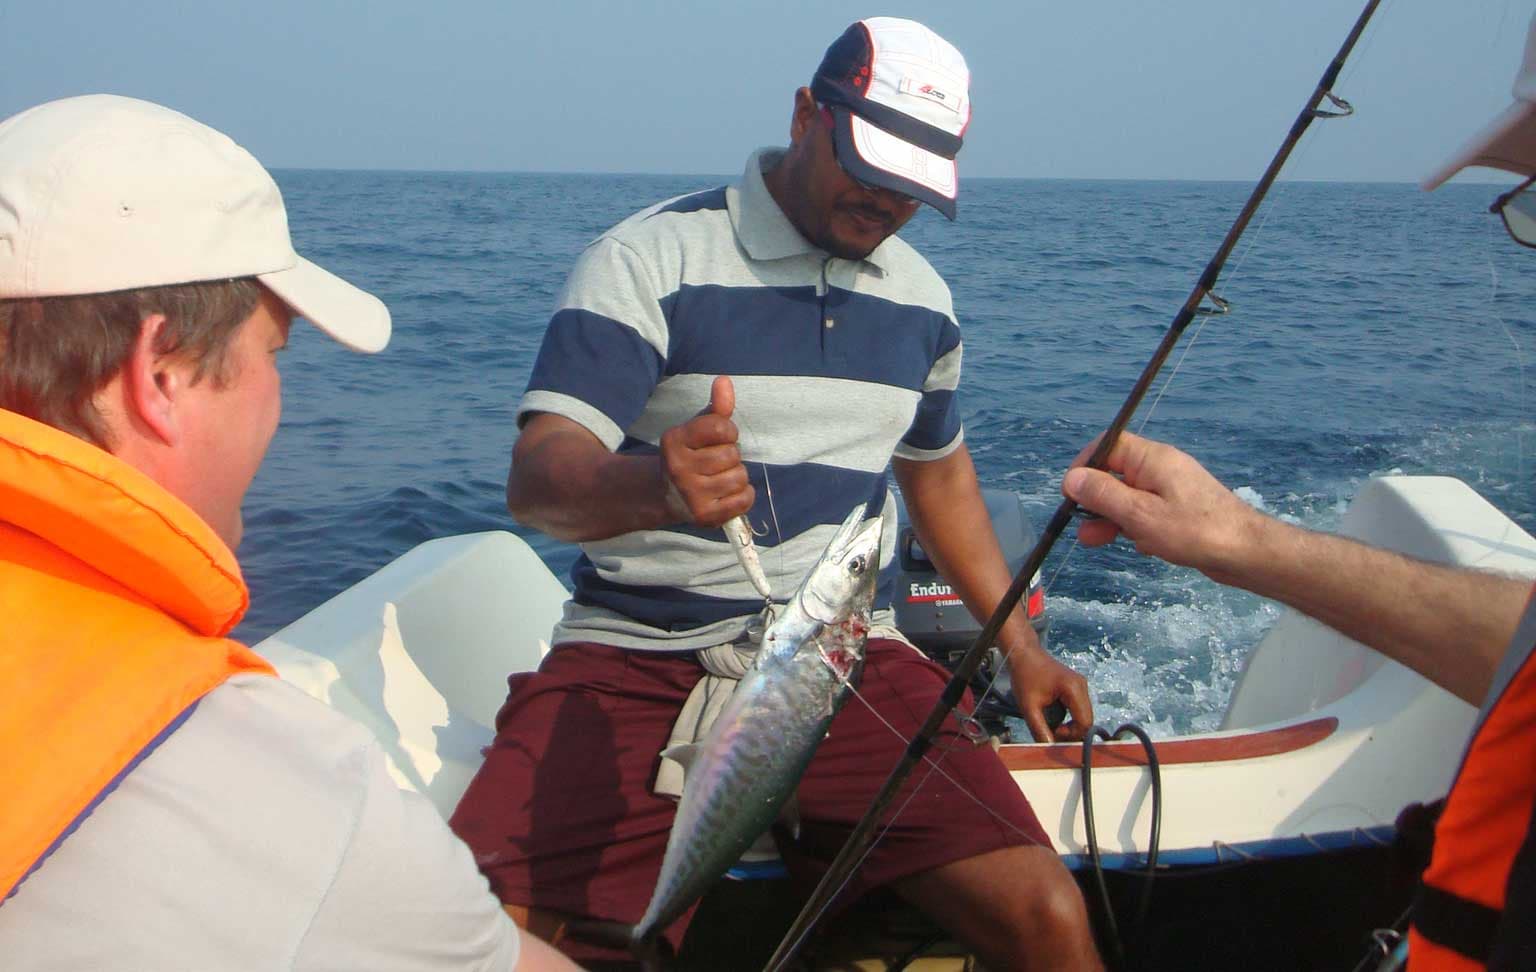 A well experienced guide showed how to catch fish in the Trincomalee fishing tour